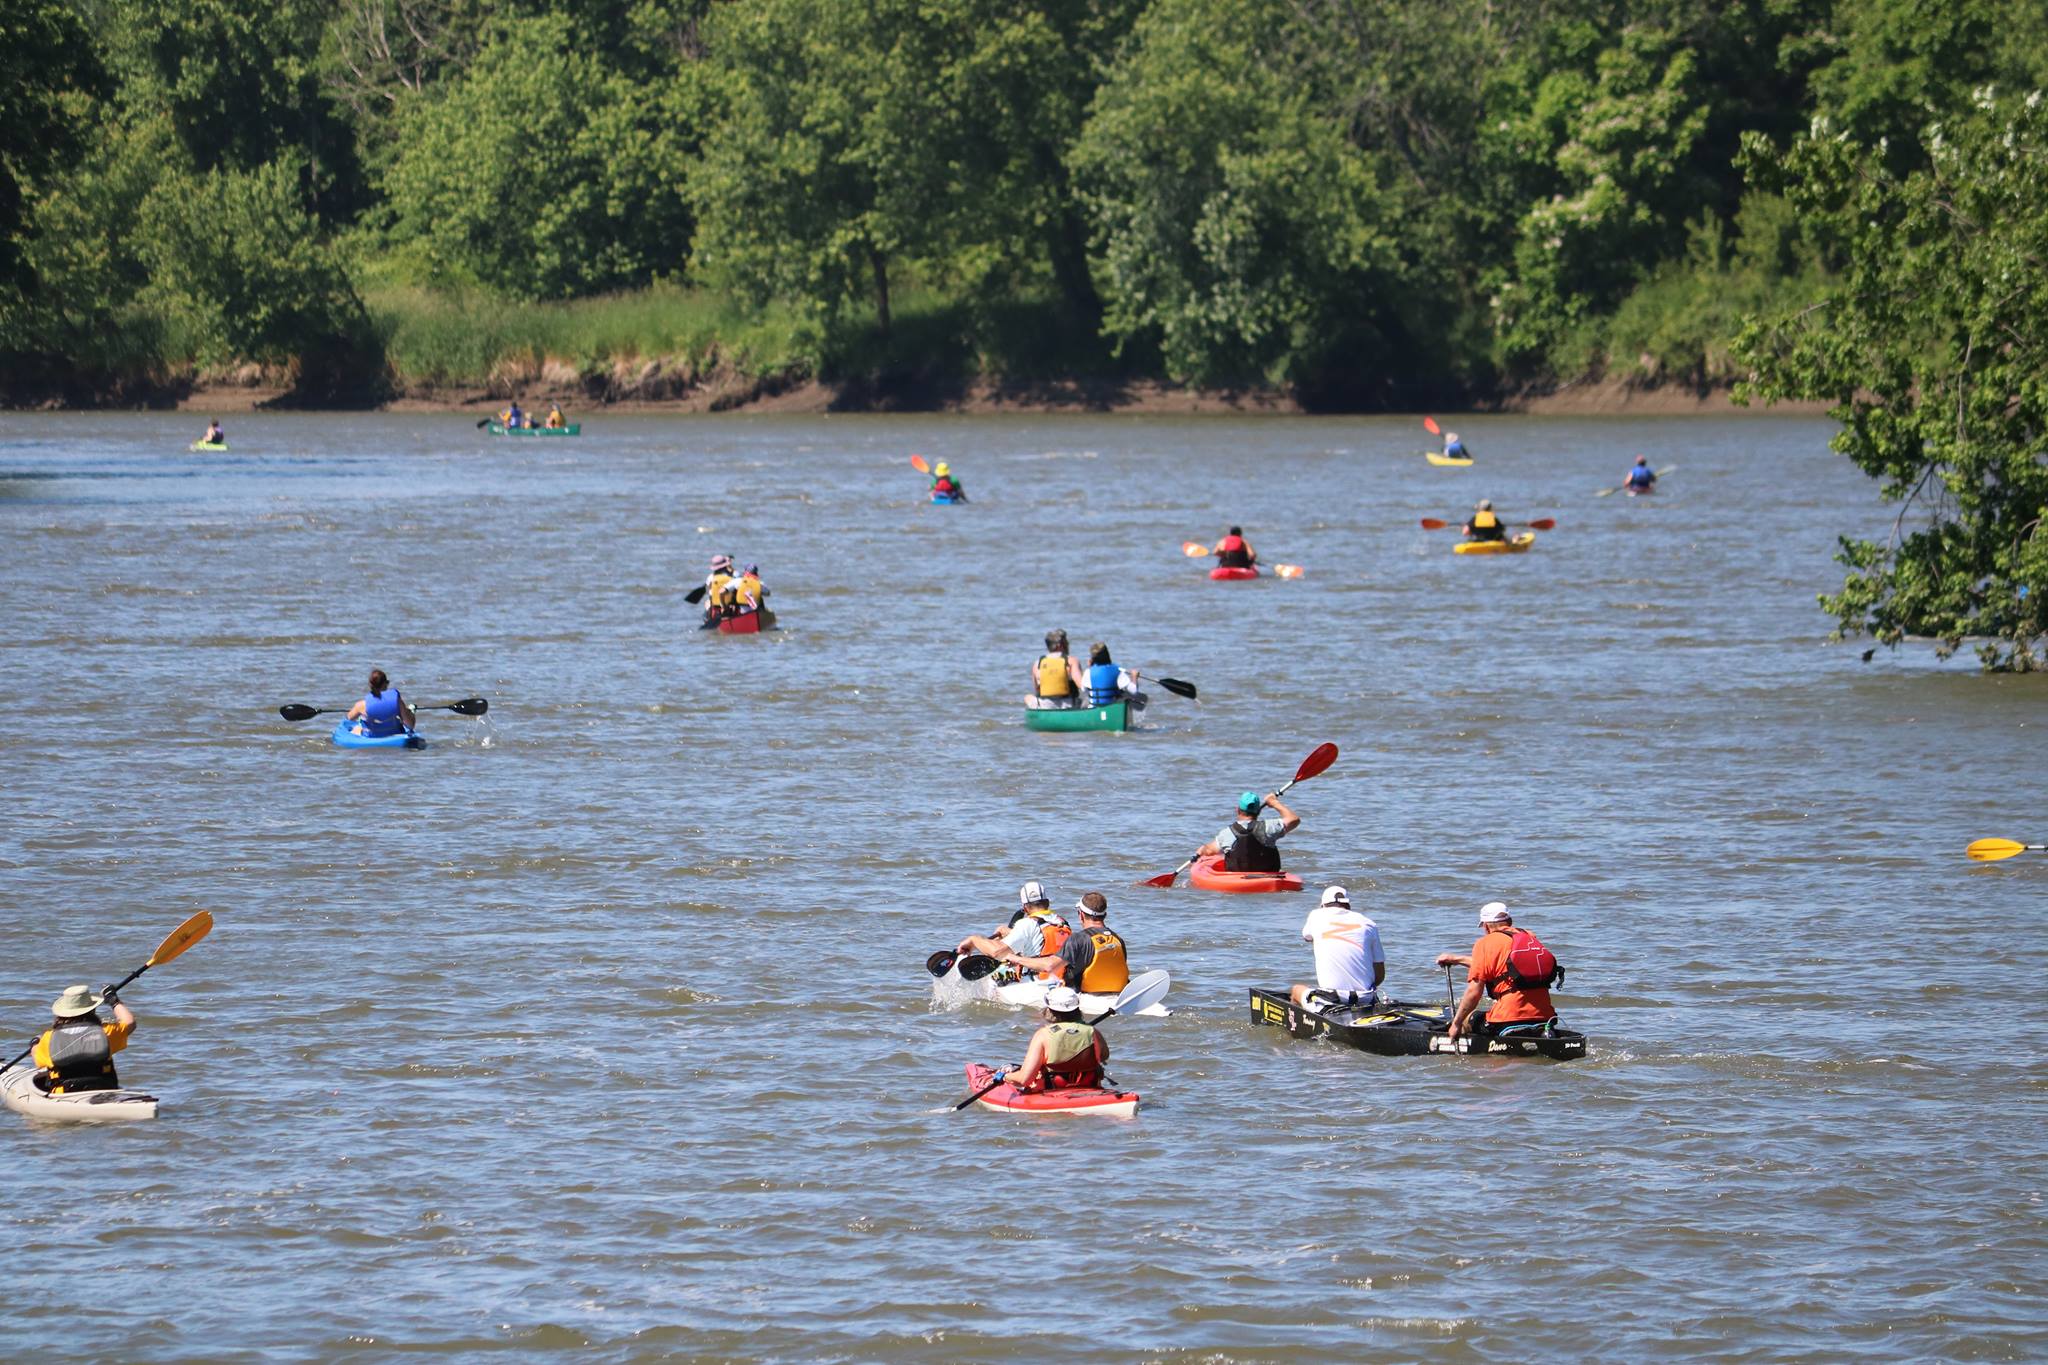 Numerous canoes and kayakers are spaced out on a section of river, all competing in the Great Iowa River Race.